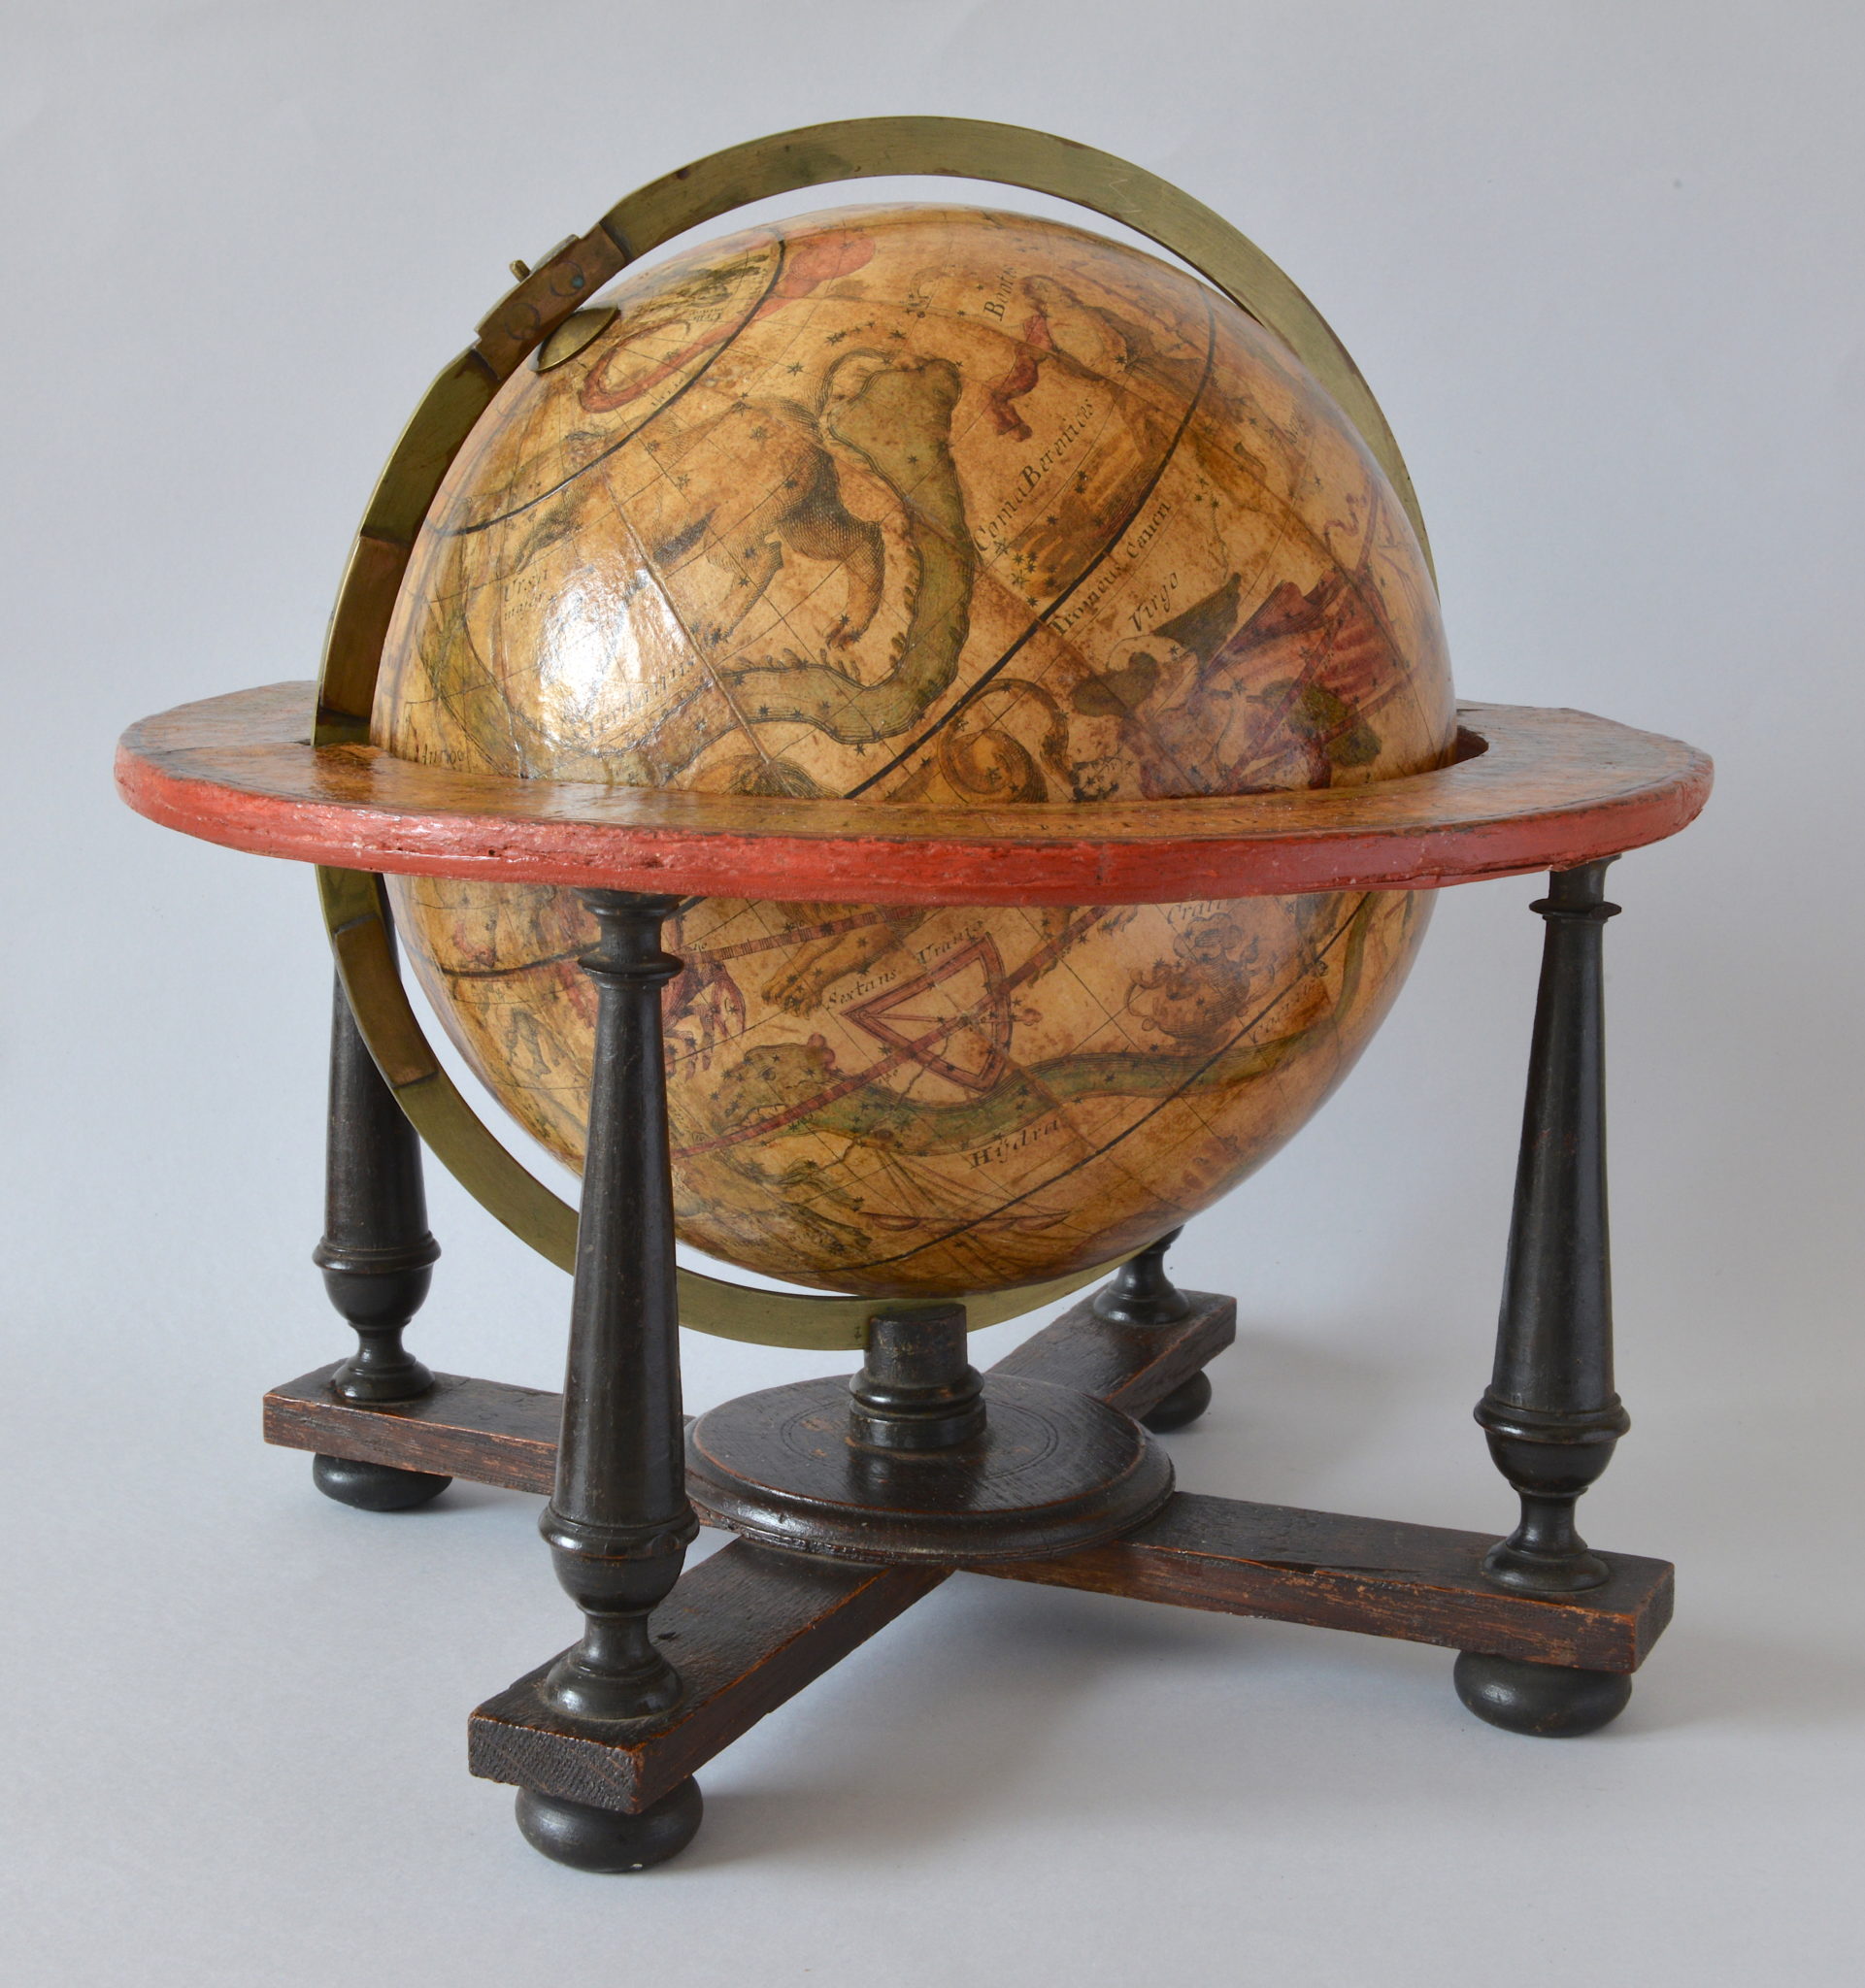 Celestial library globe signed Mattheus Seutter made in Augsbourg circa 1710.